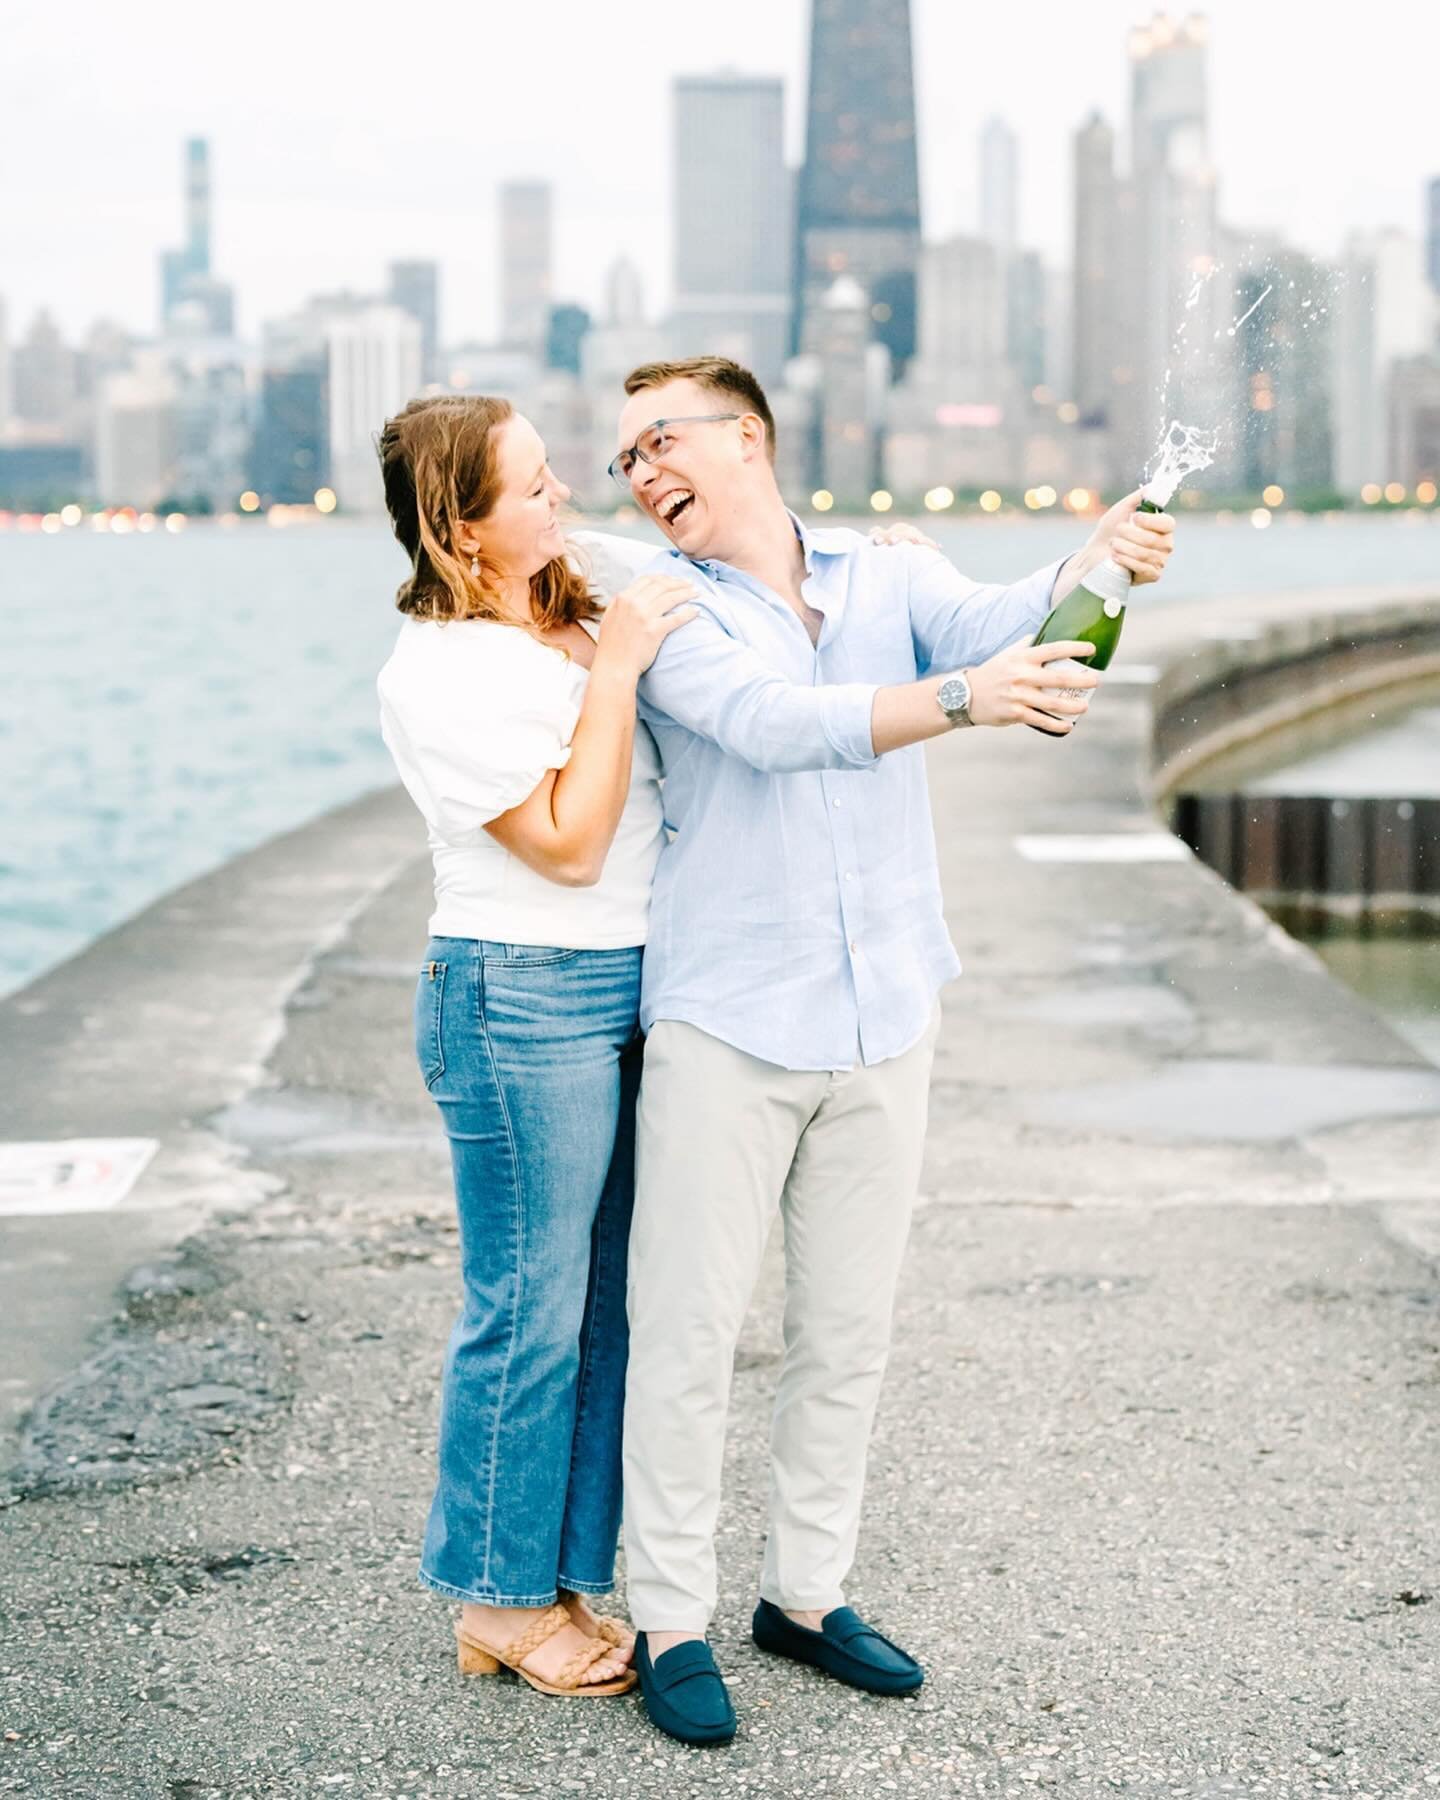 We are pretty crazy backed up in sharing all the sessions from this past week, so we&rsquo;re going to start off with these two adorable humans and their Chicago Engagement Session. I had so much fun meeting up with them and capturing them in their n